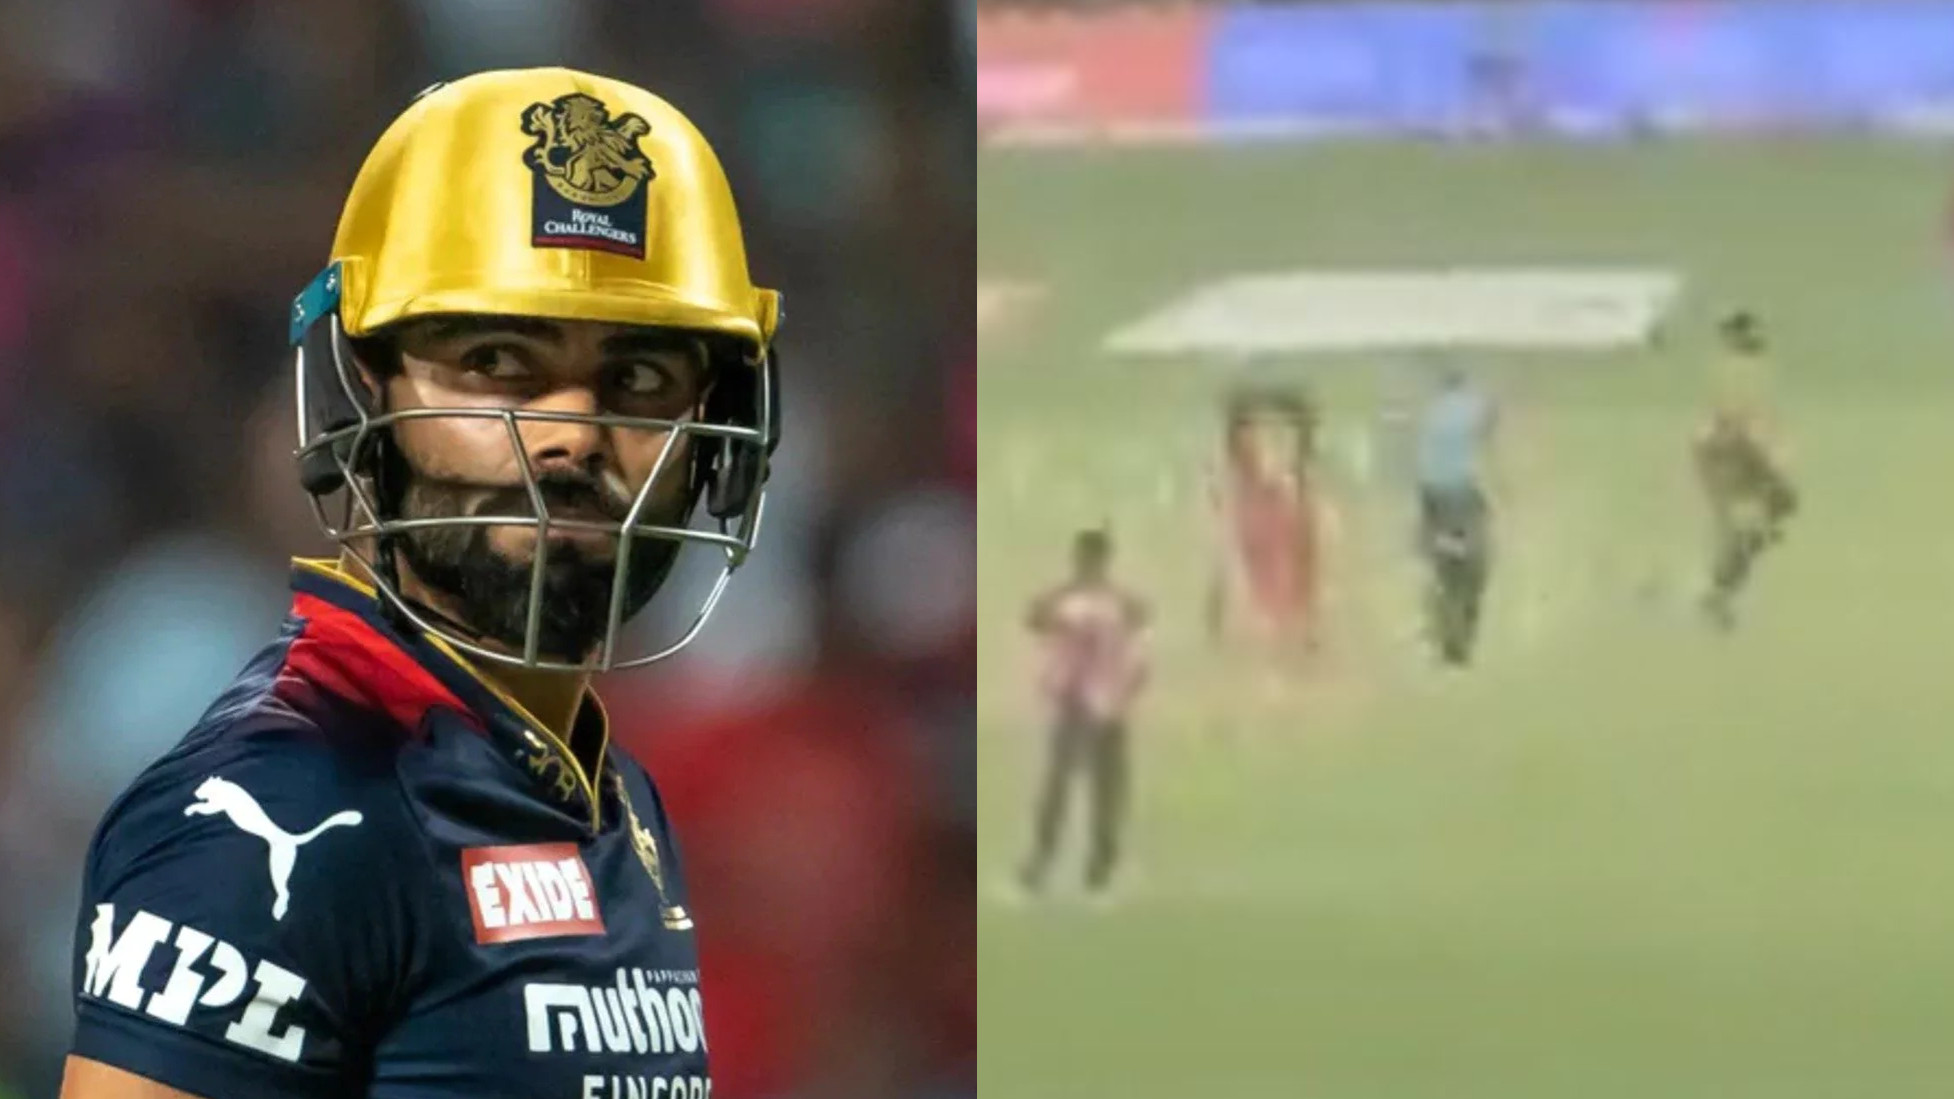 IPL 2022: WATCH- Fan invades pitch, touches Virat Kohli’s glove in Qualifier 2 between RR and RCB